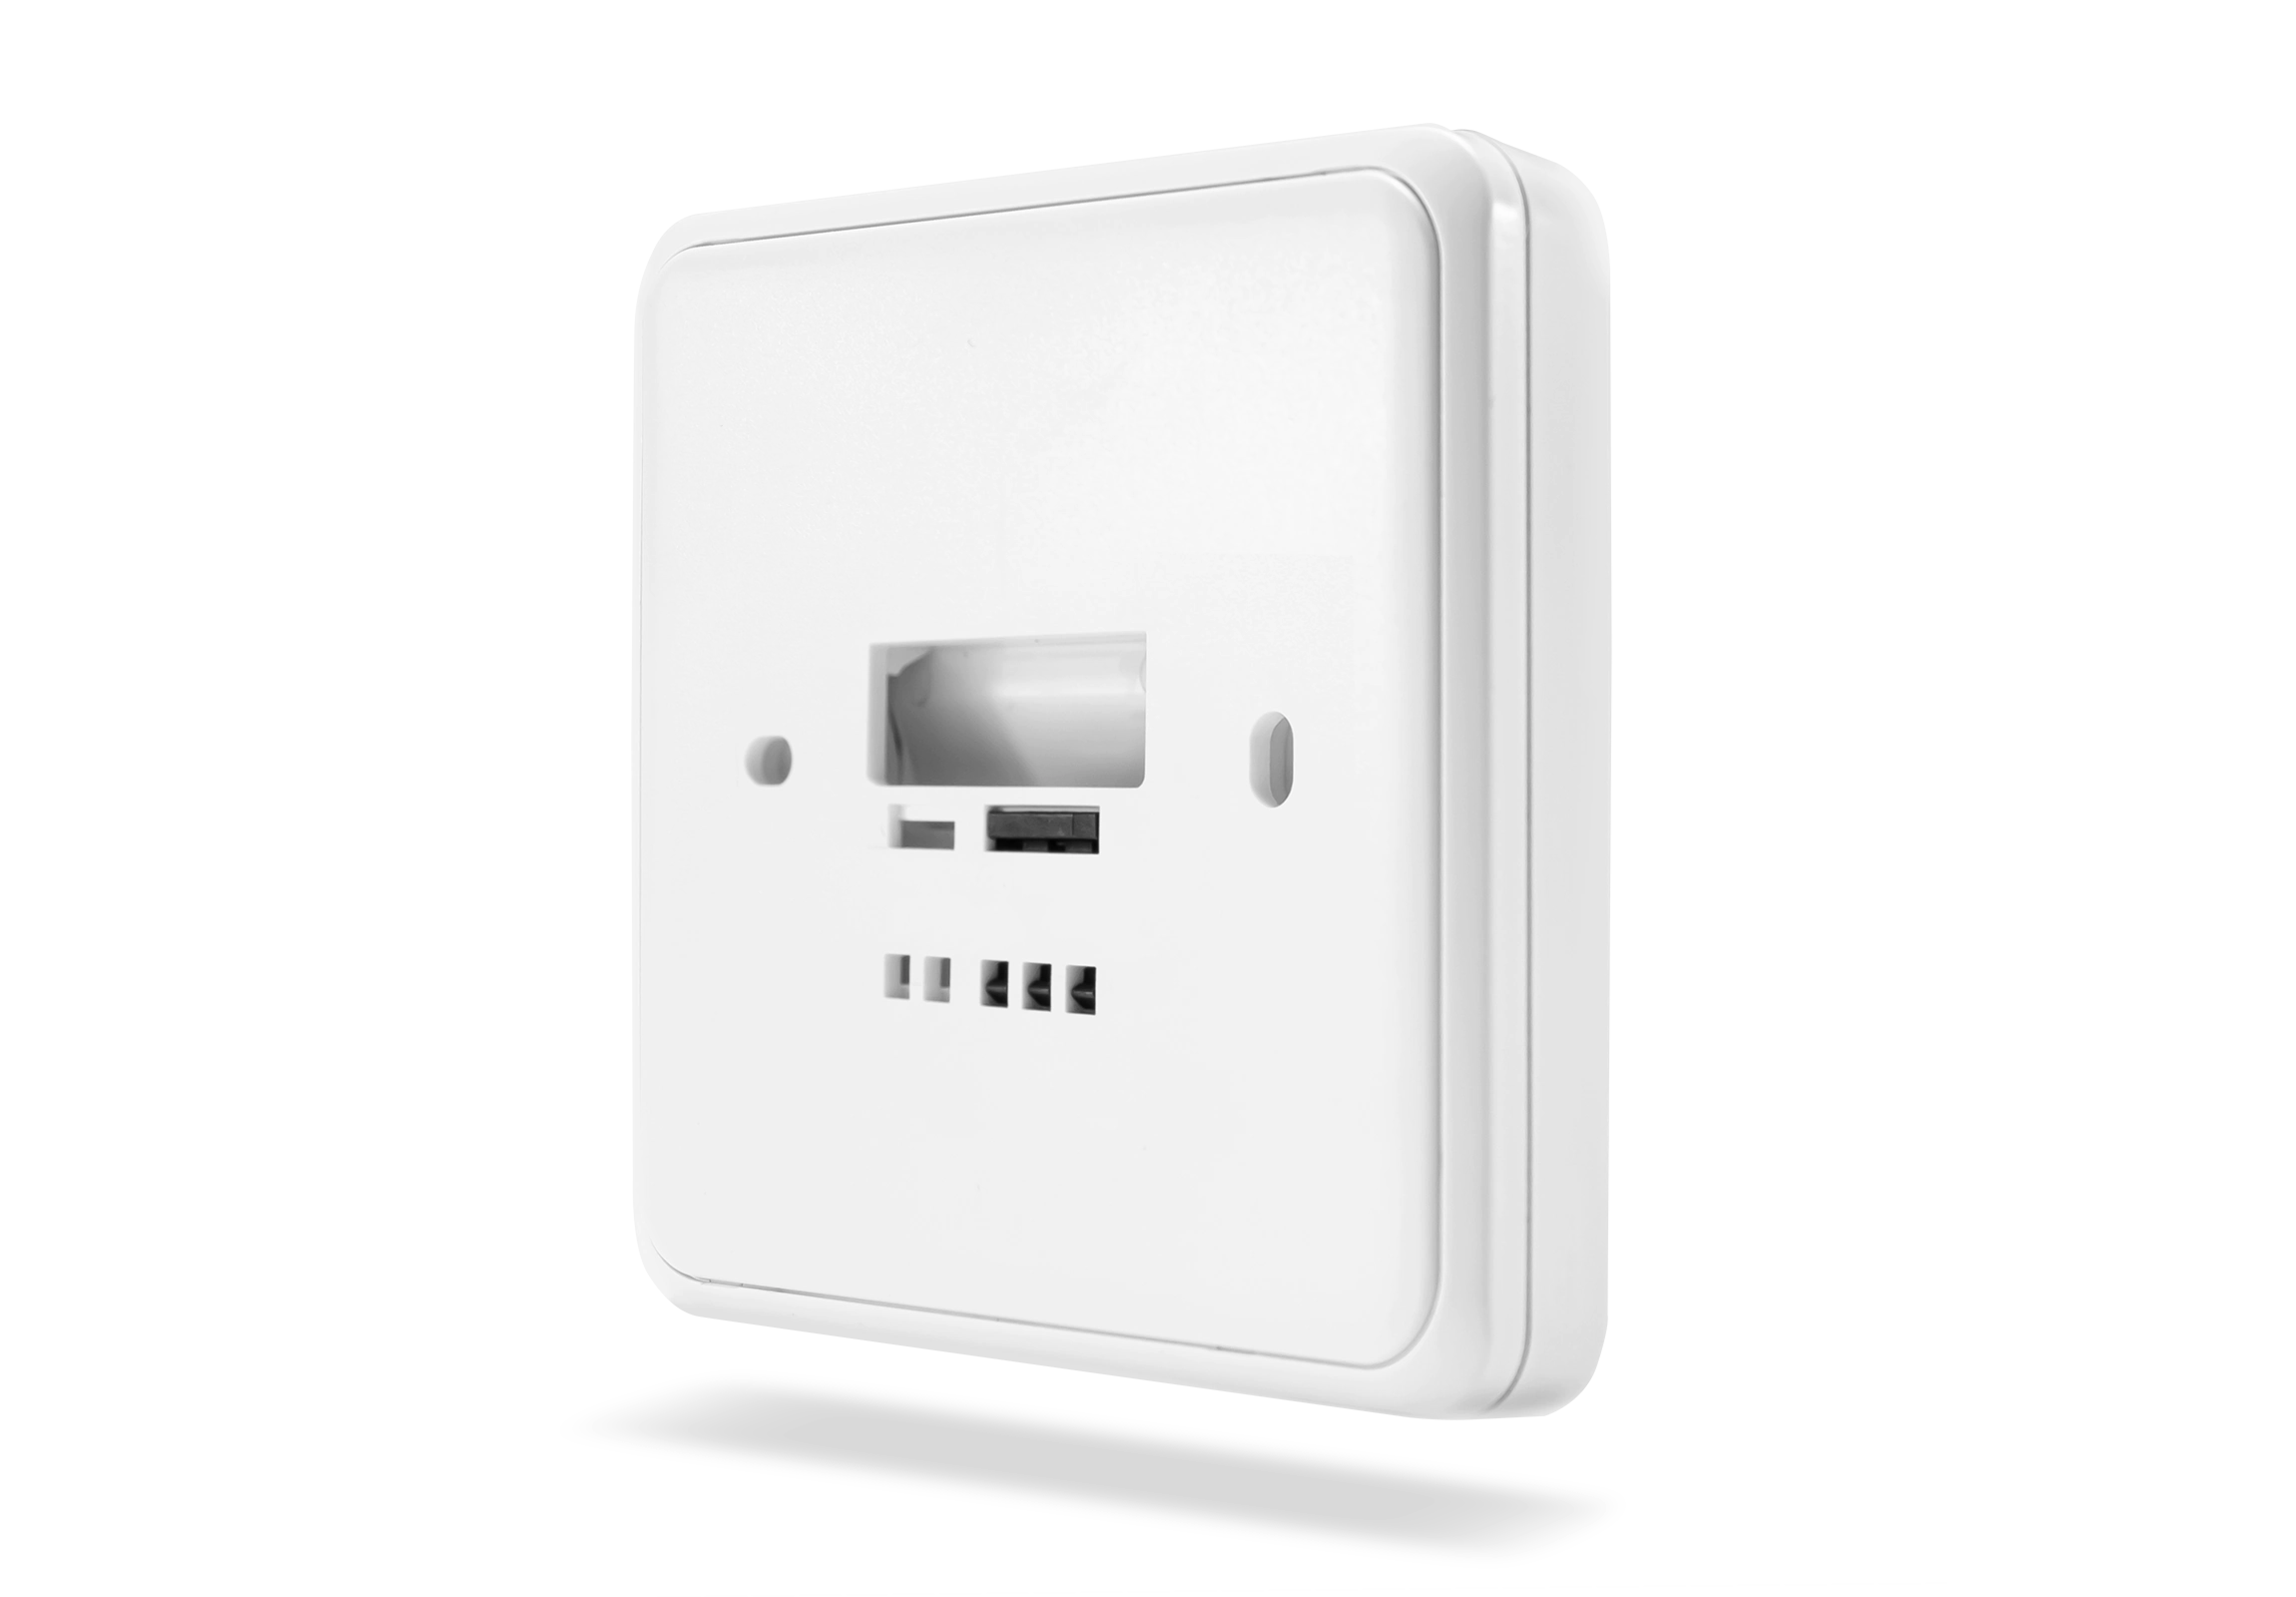 Homplex HT2310 WR intelligent room thermostat back right